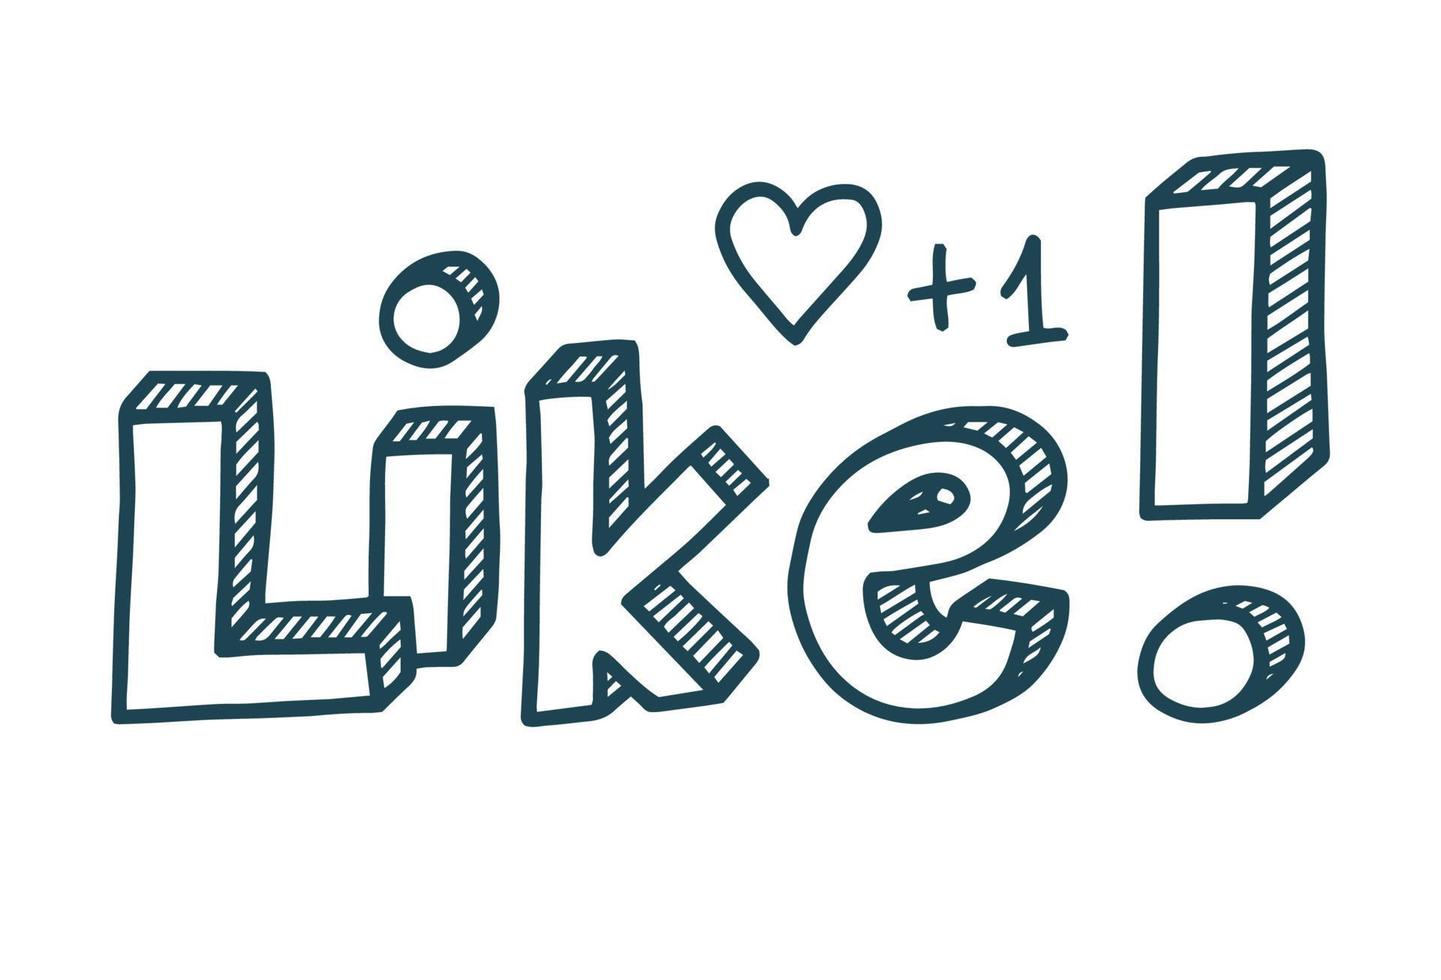 Social media, likes for posts and other media pics. Vector illustration in cute style